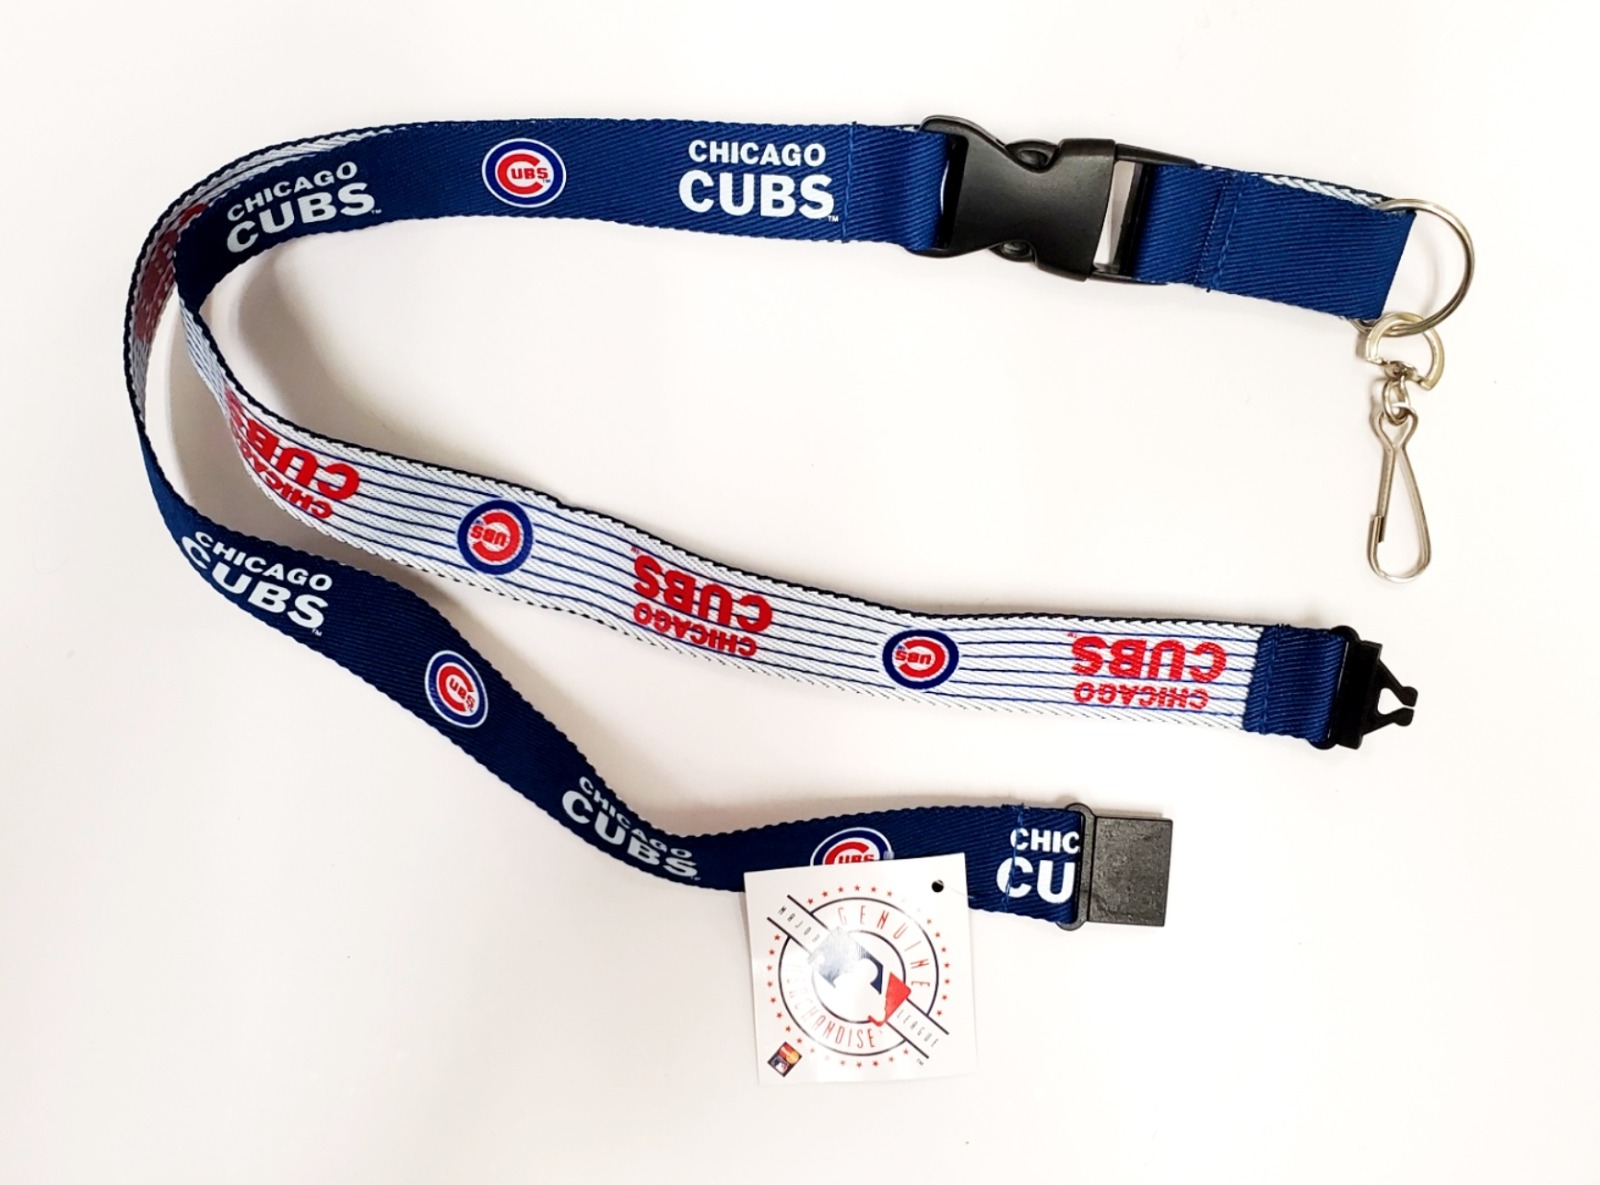 Pick A Design Chicago Cubs Lanyard Keychains New Free Shipping